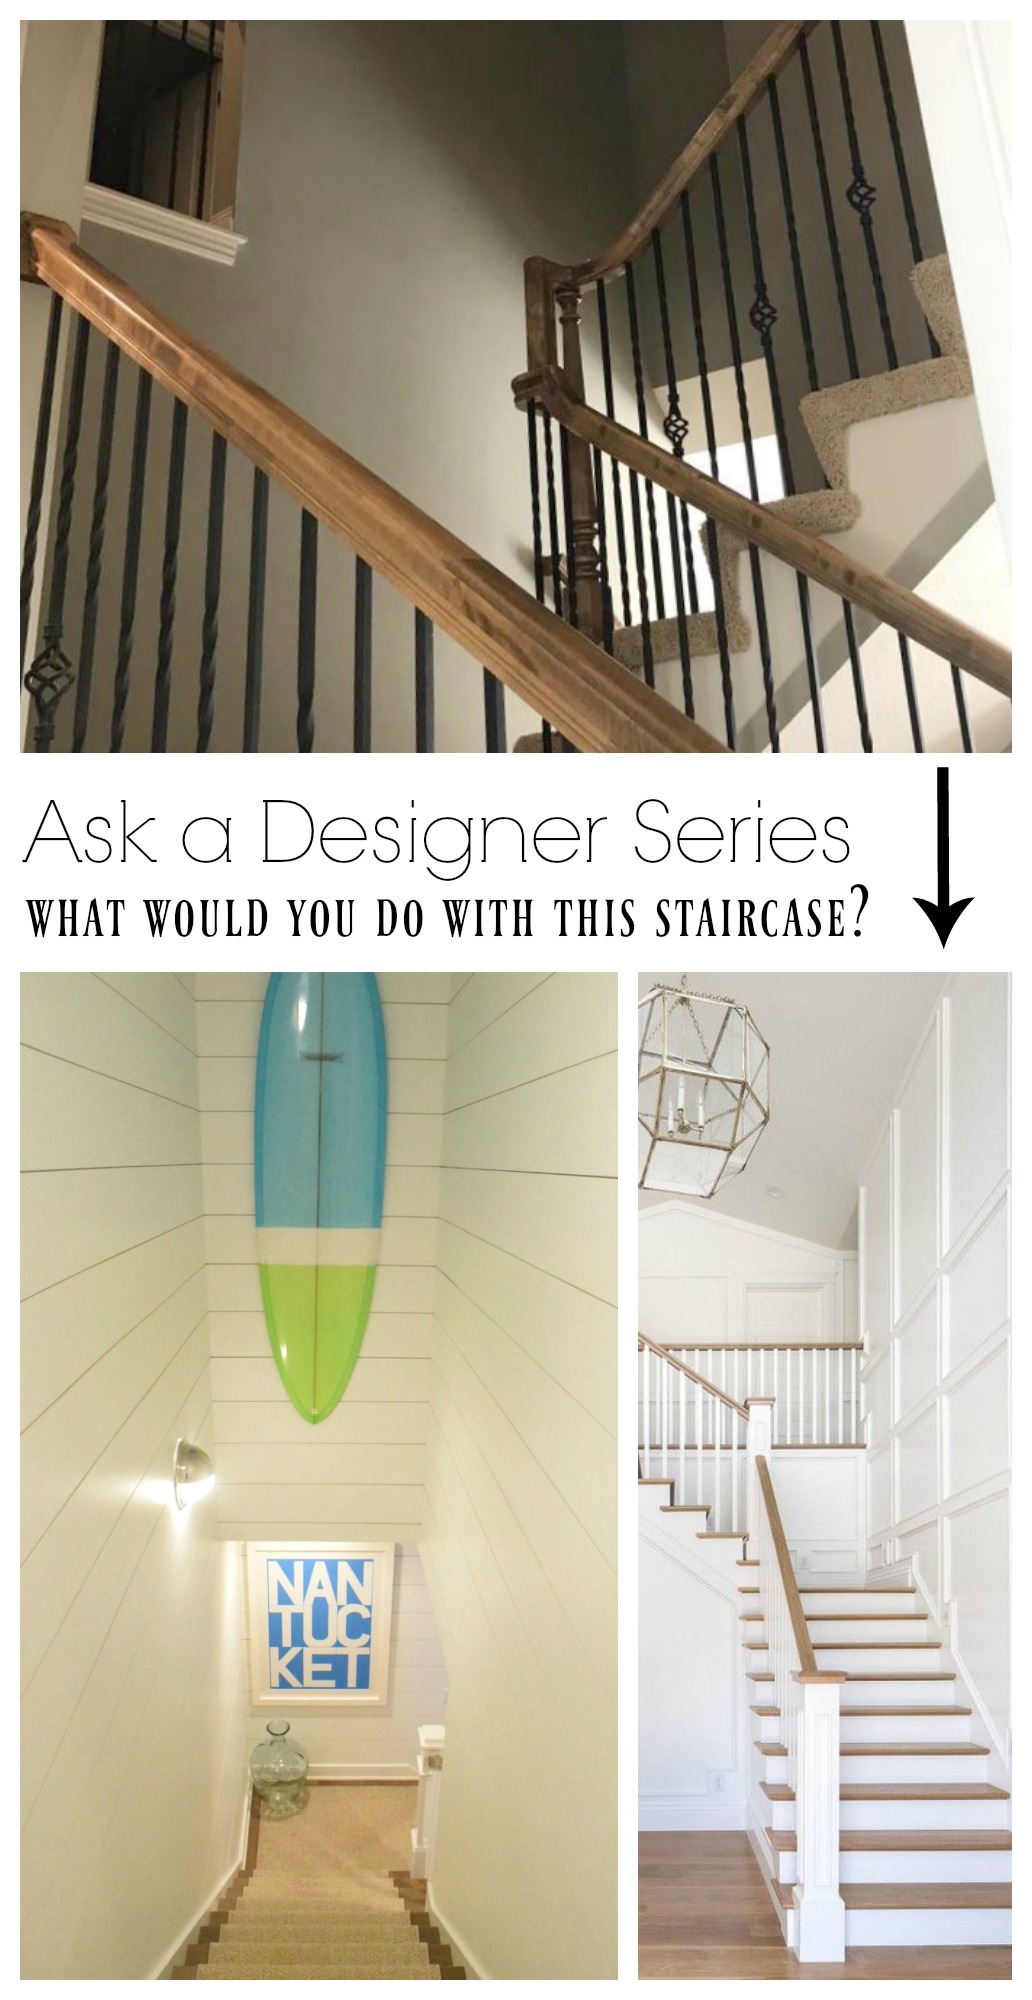 Ask a Designer Series- What would you do with this staircase?